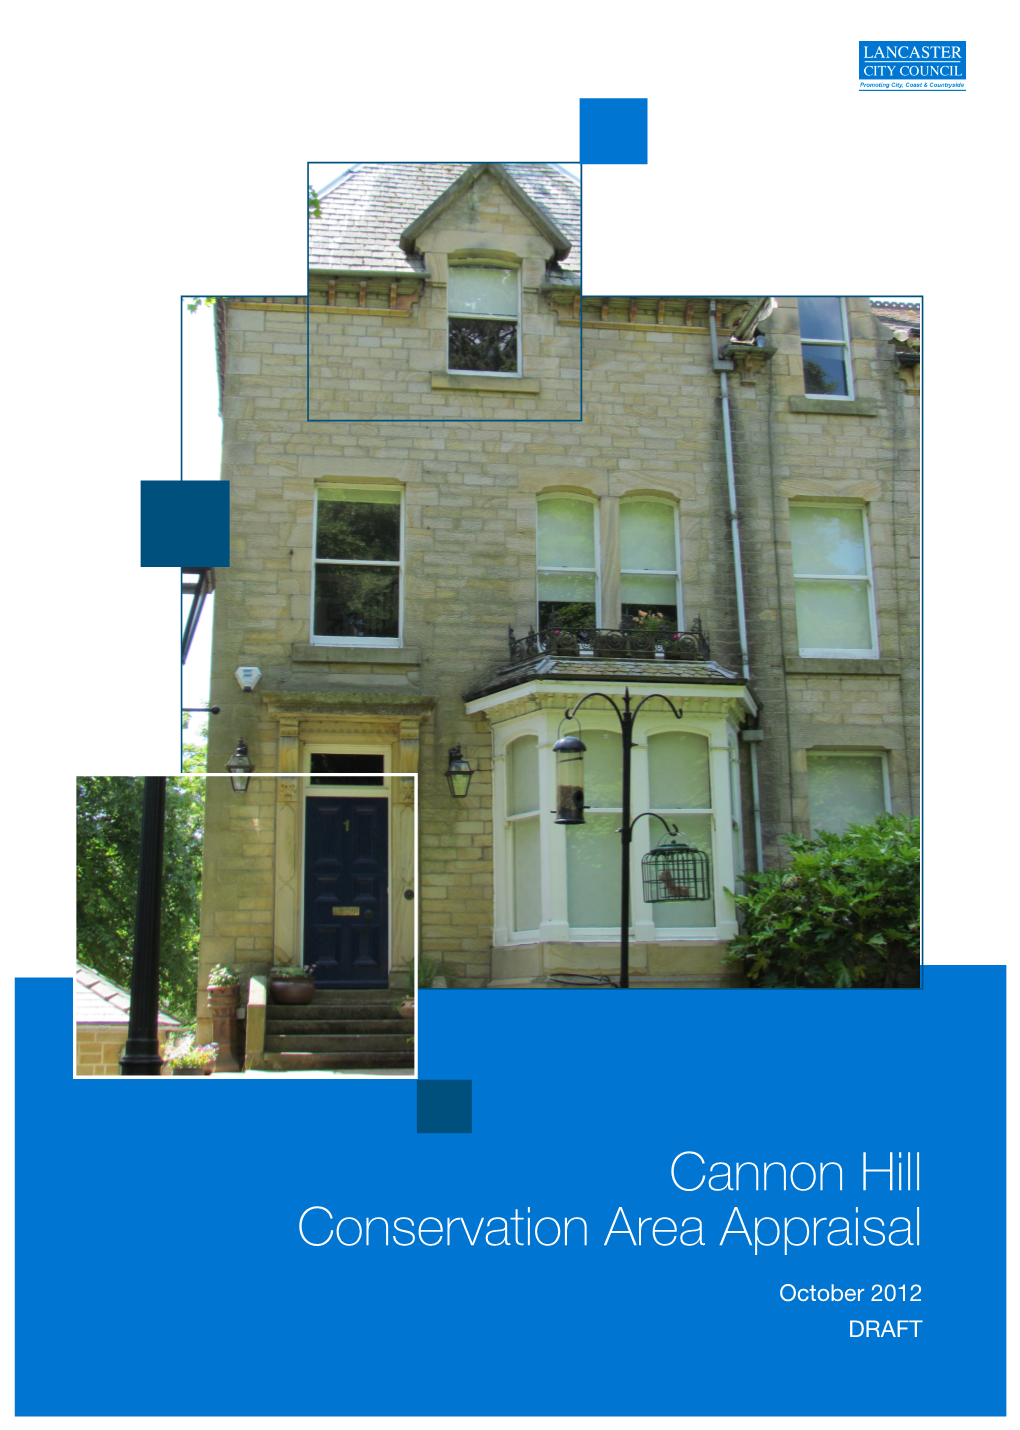 Cannon Hill Conservation Area Appraisal